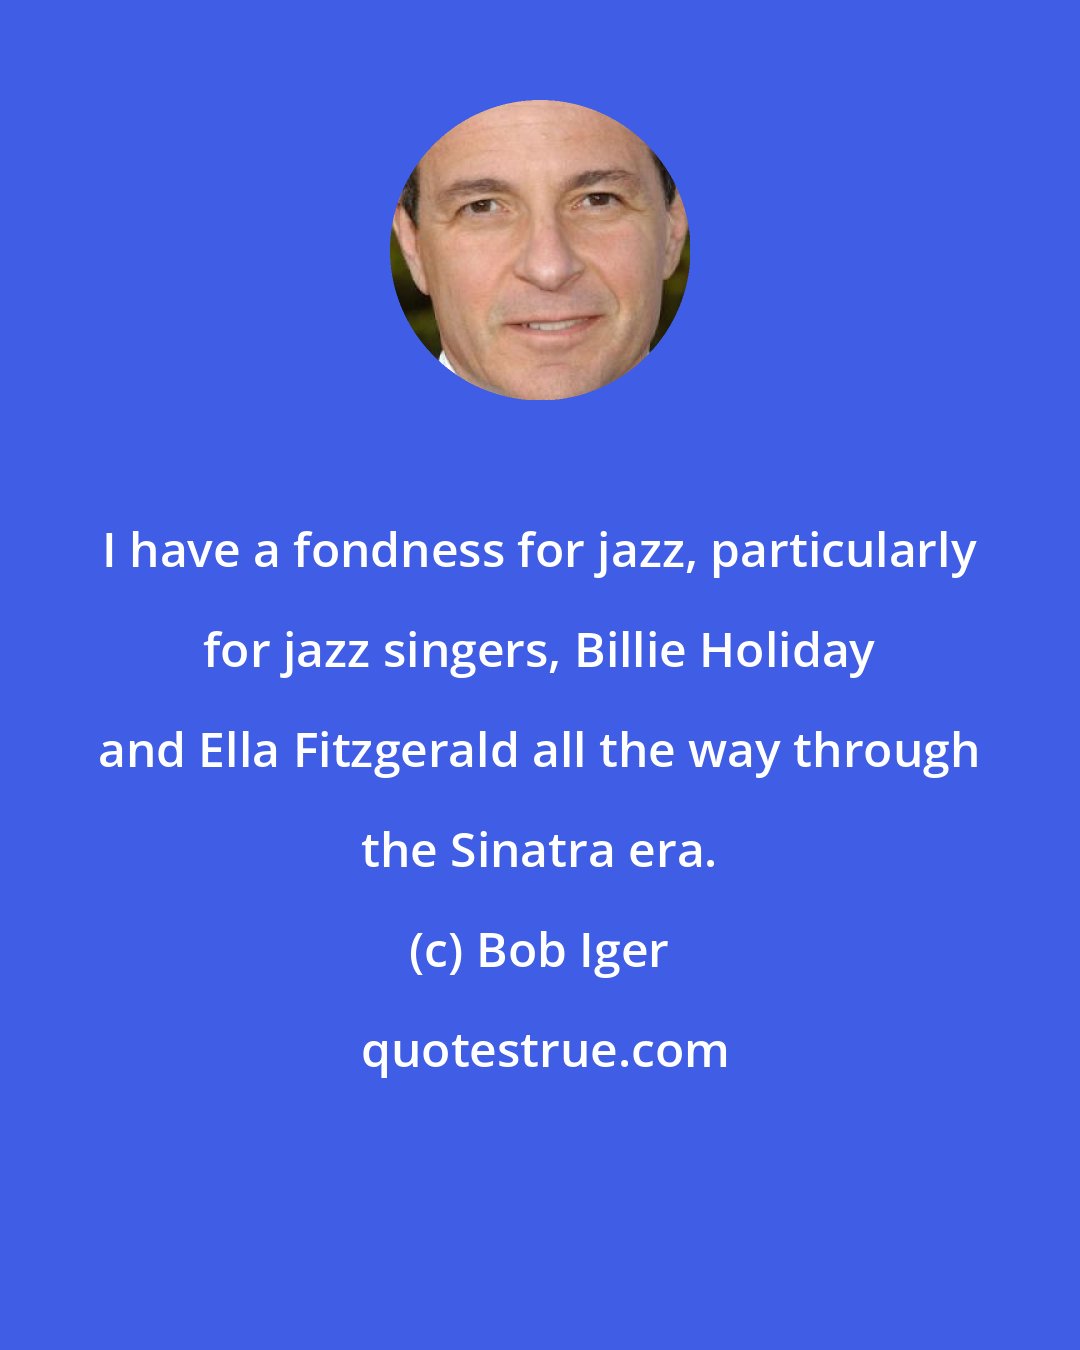 Bob Iger: I have a fondness for jazz, particularly for jazz singers, Billie Holiday and Ella Fitzgerald all the way through the Sinatra era.